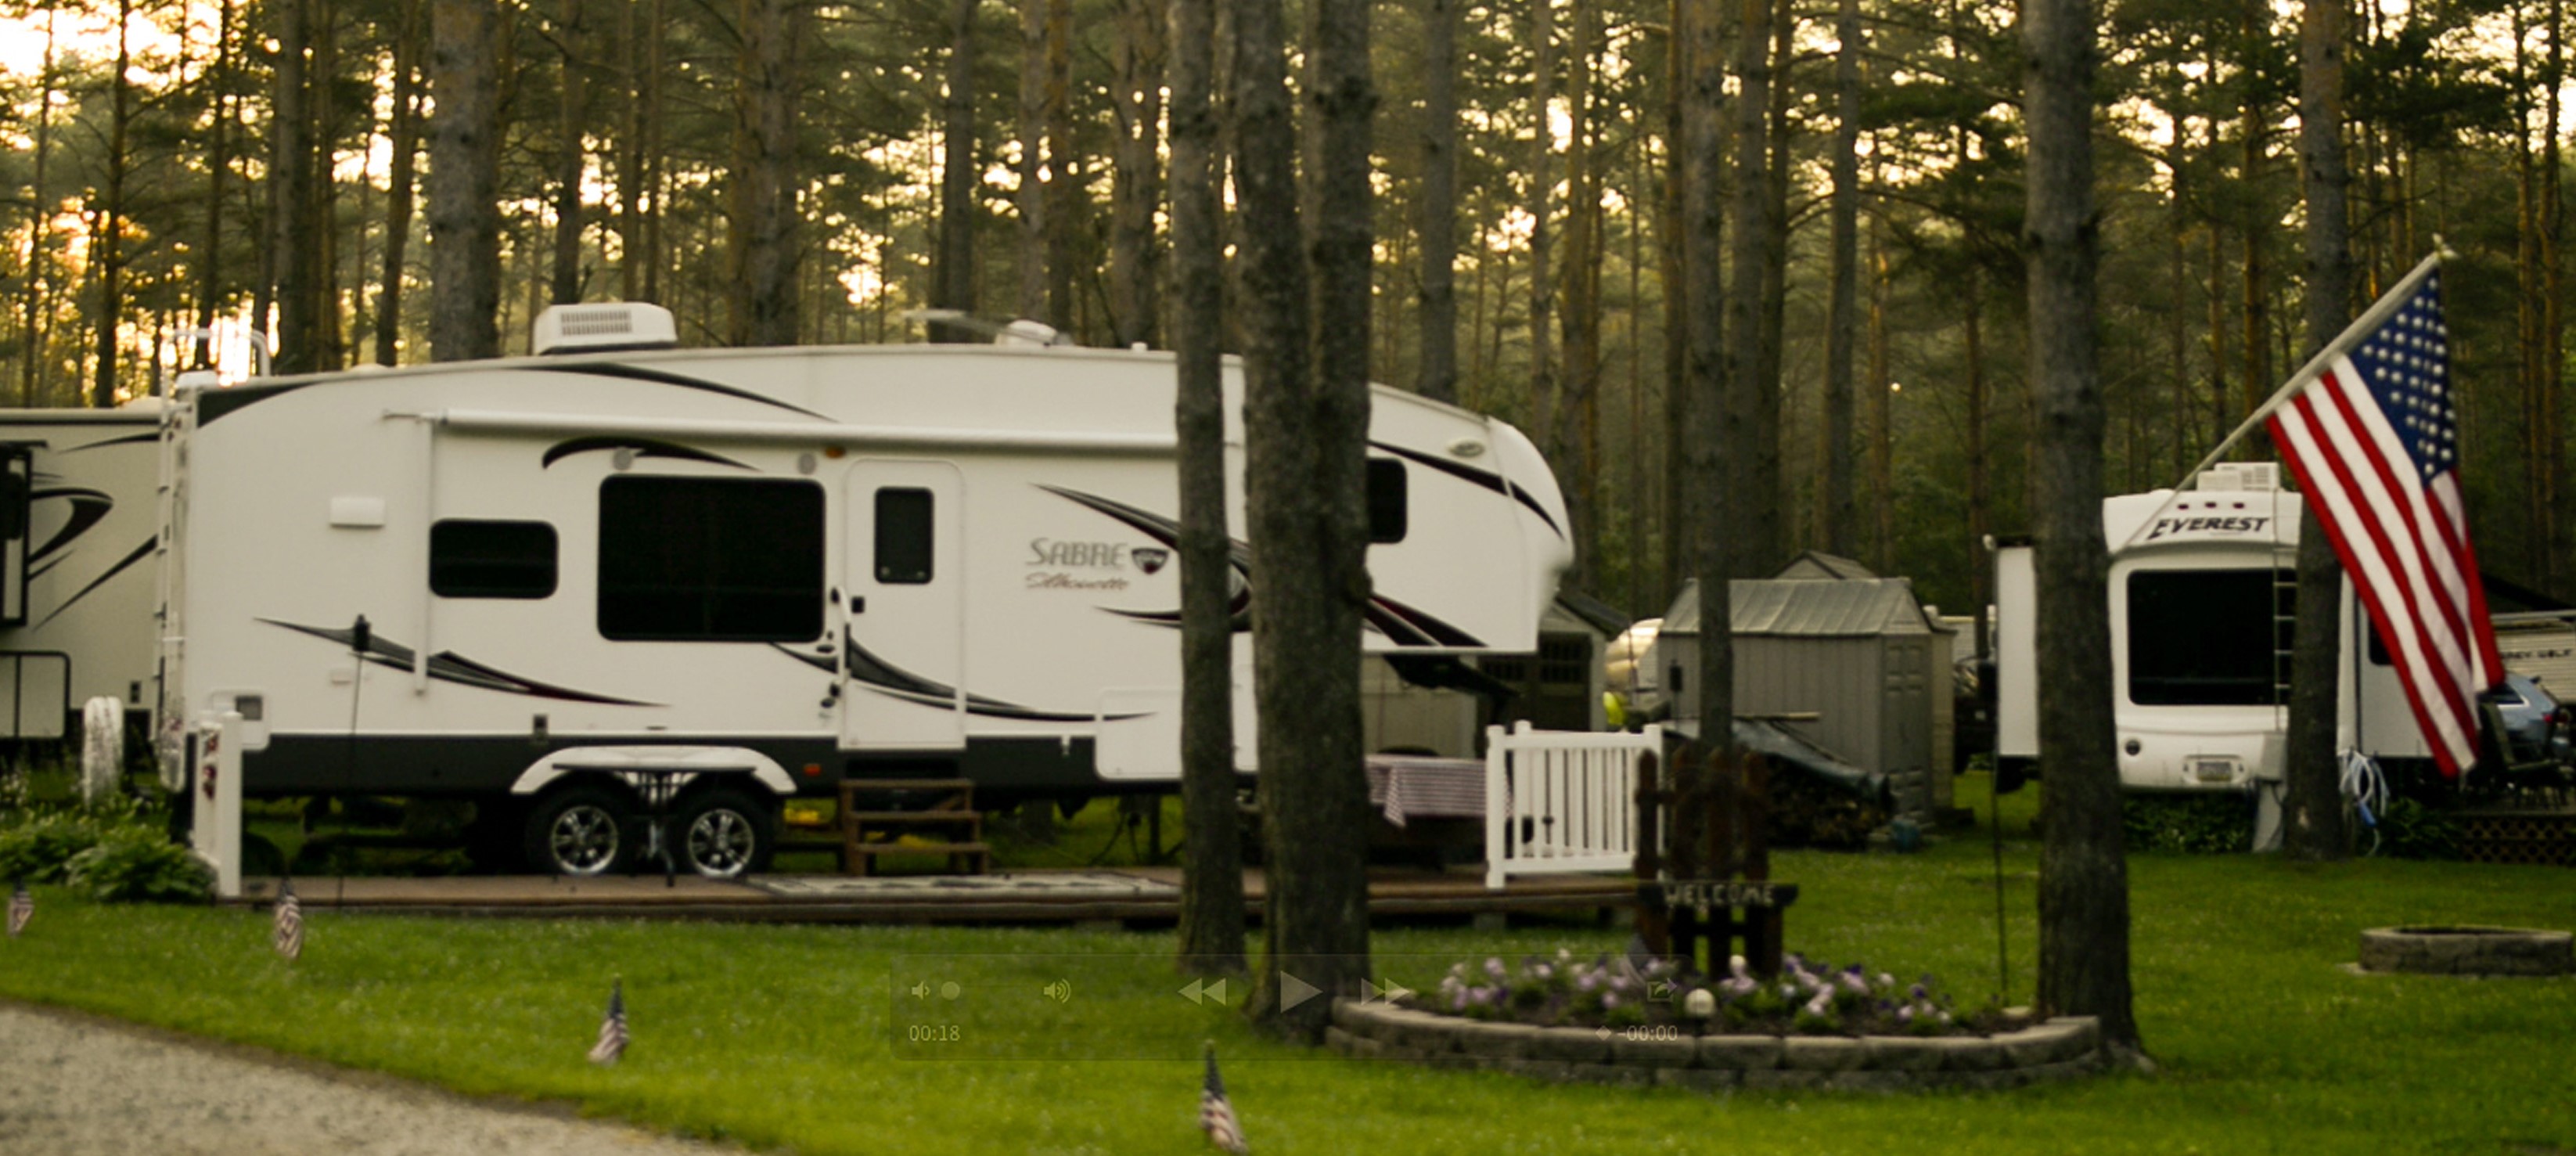 How to Plan an Energy-Efficient RV Trip in 7 Steps